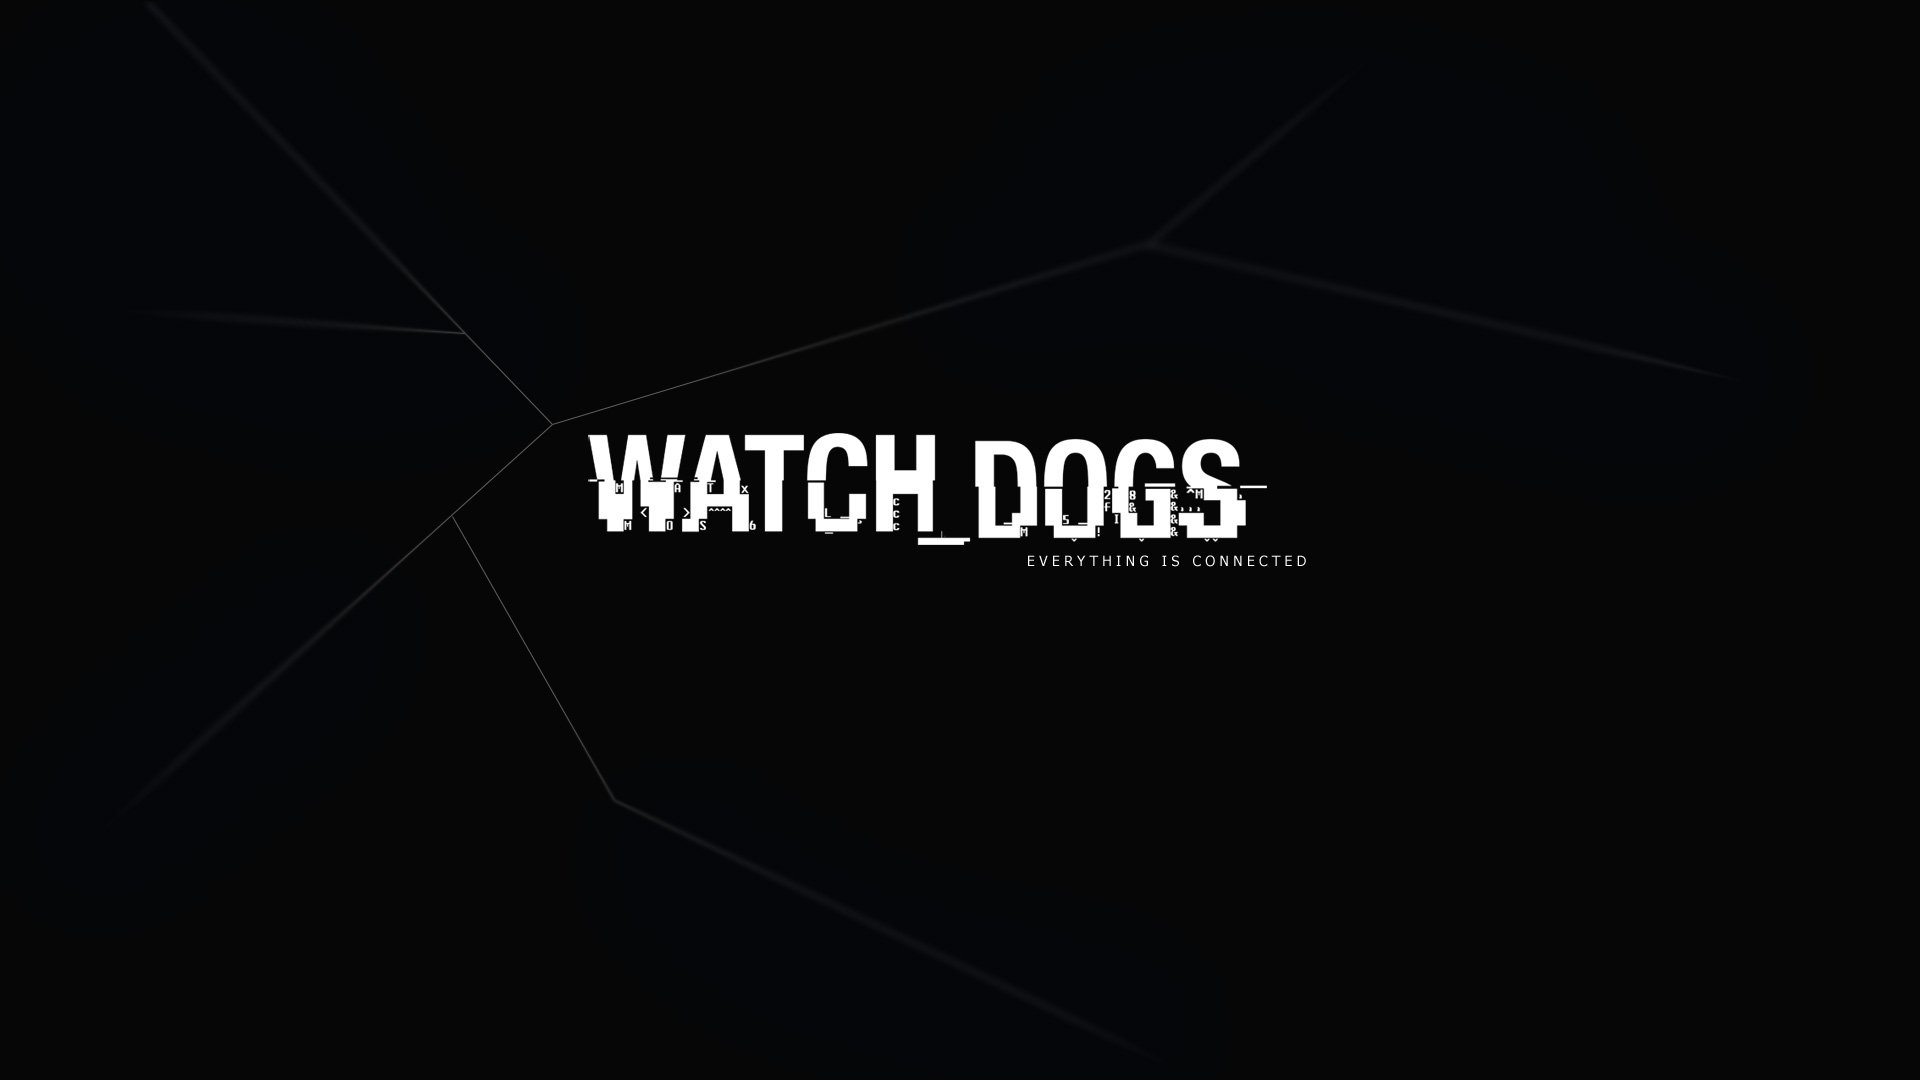 Nice HD Wallpaper S Collection Of WatcHDog Best Image